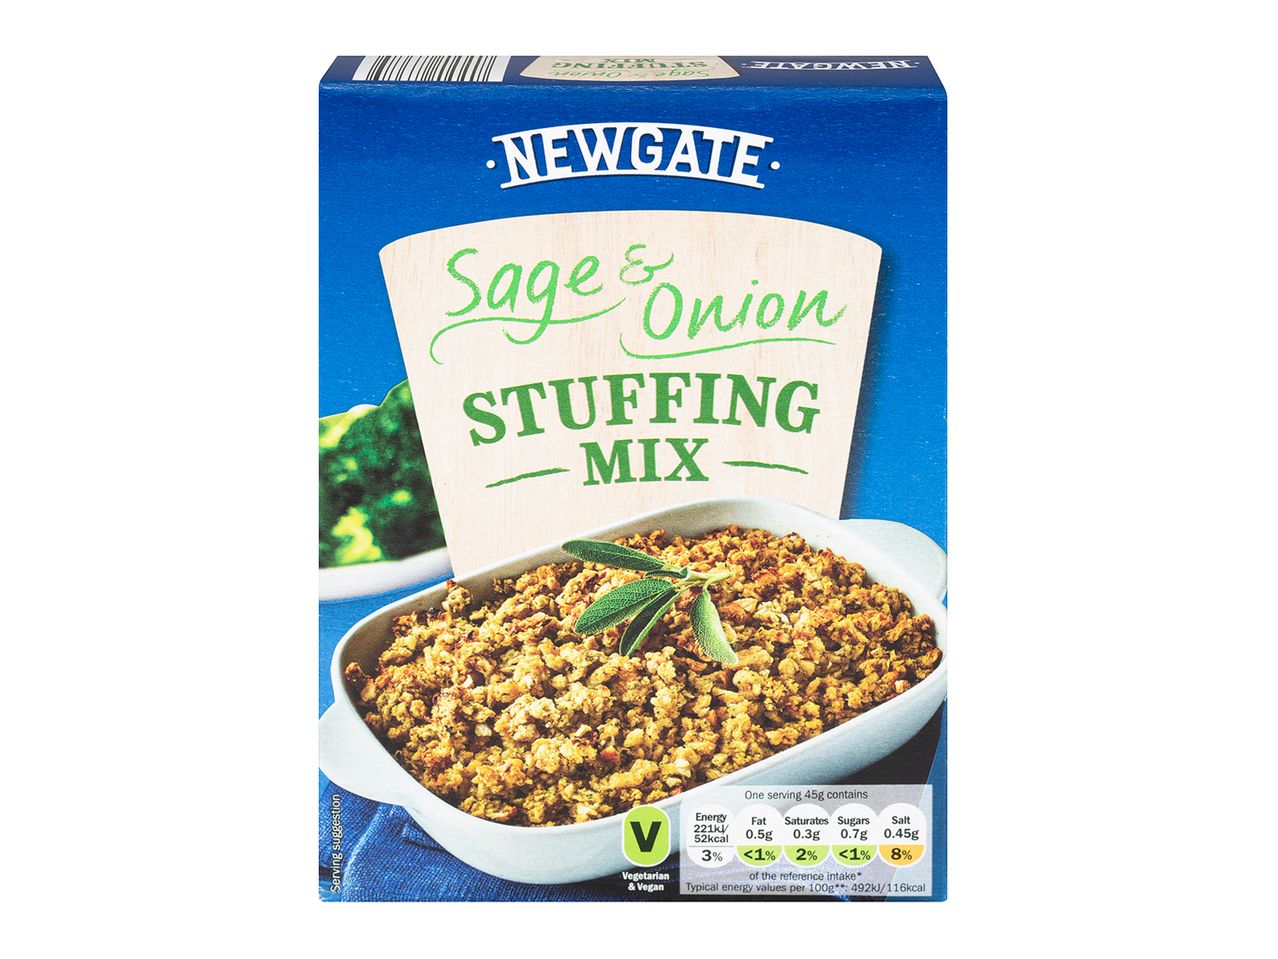 Go to full screen view: Newgate Stuffing Mix - Image 1